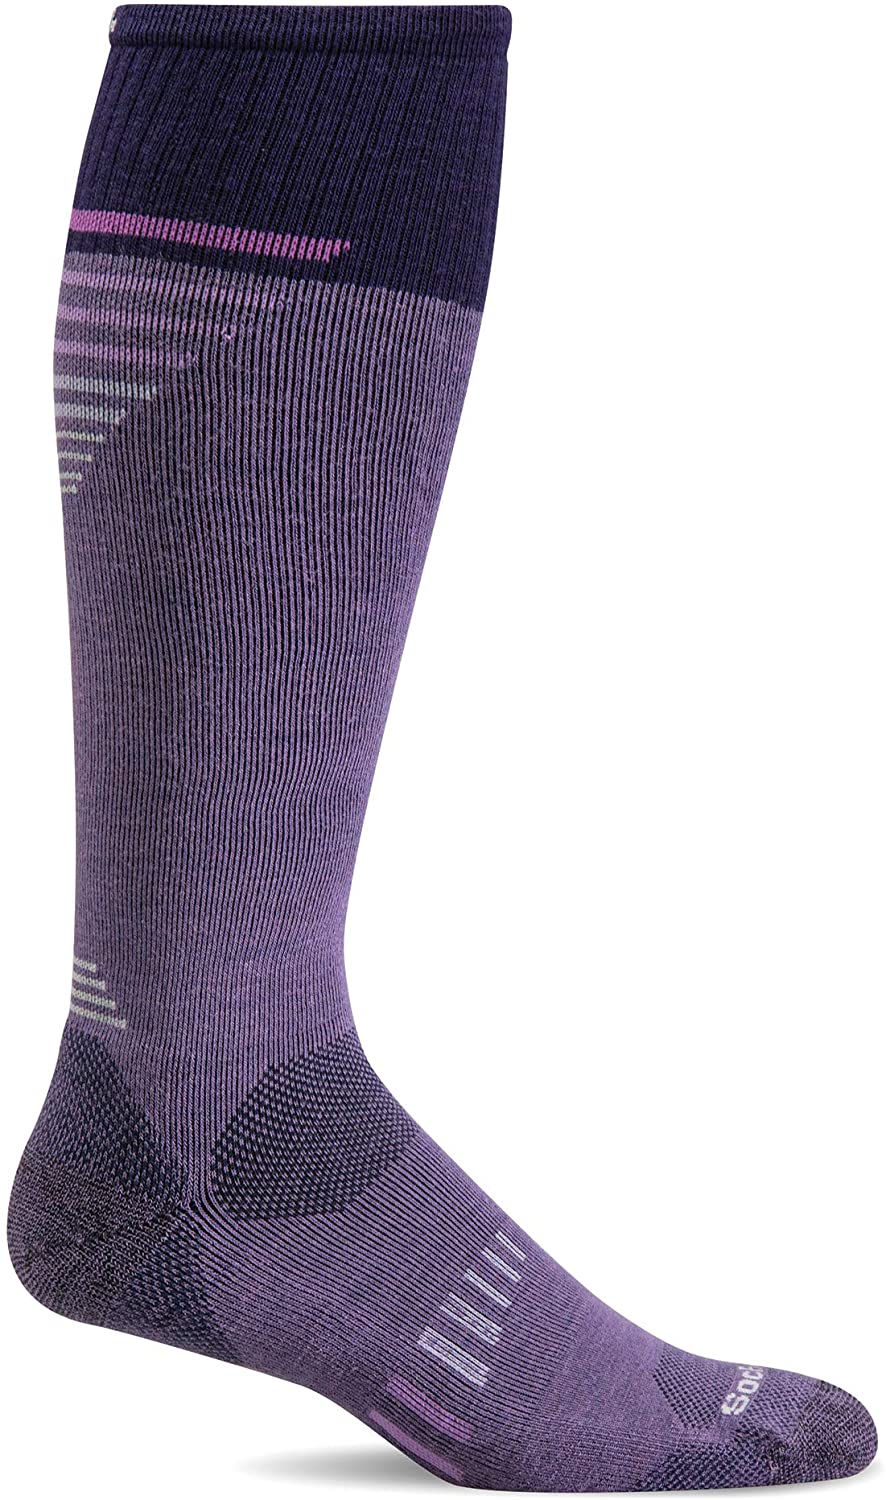 Sockwell Women's Ascend II Knee High Compression Sock in Plum from the side